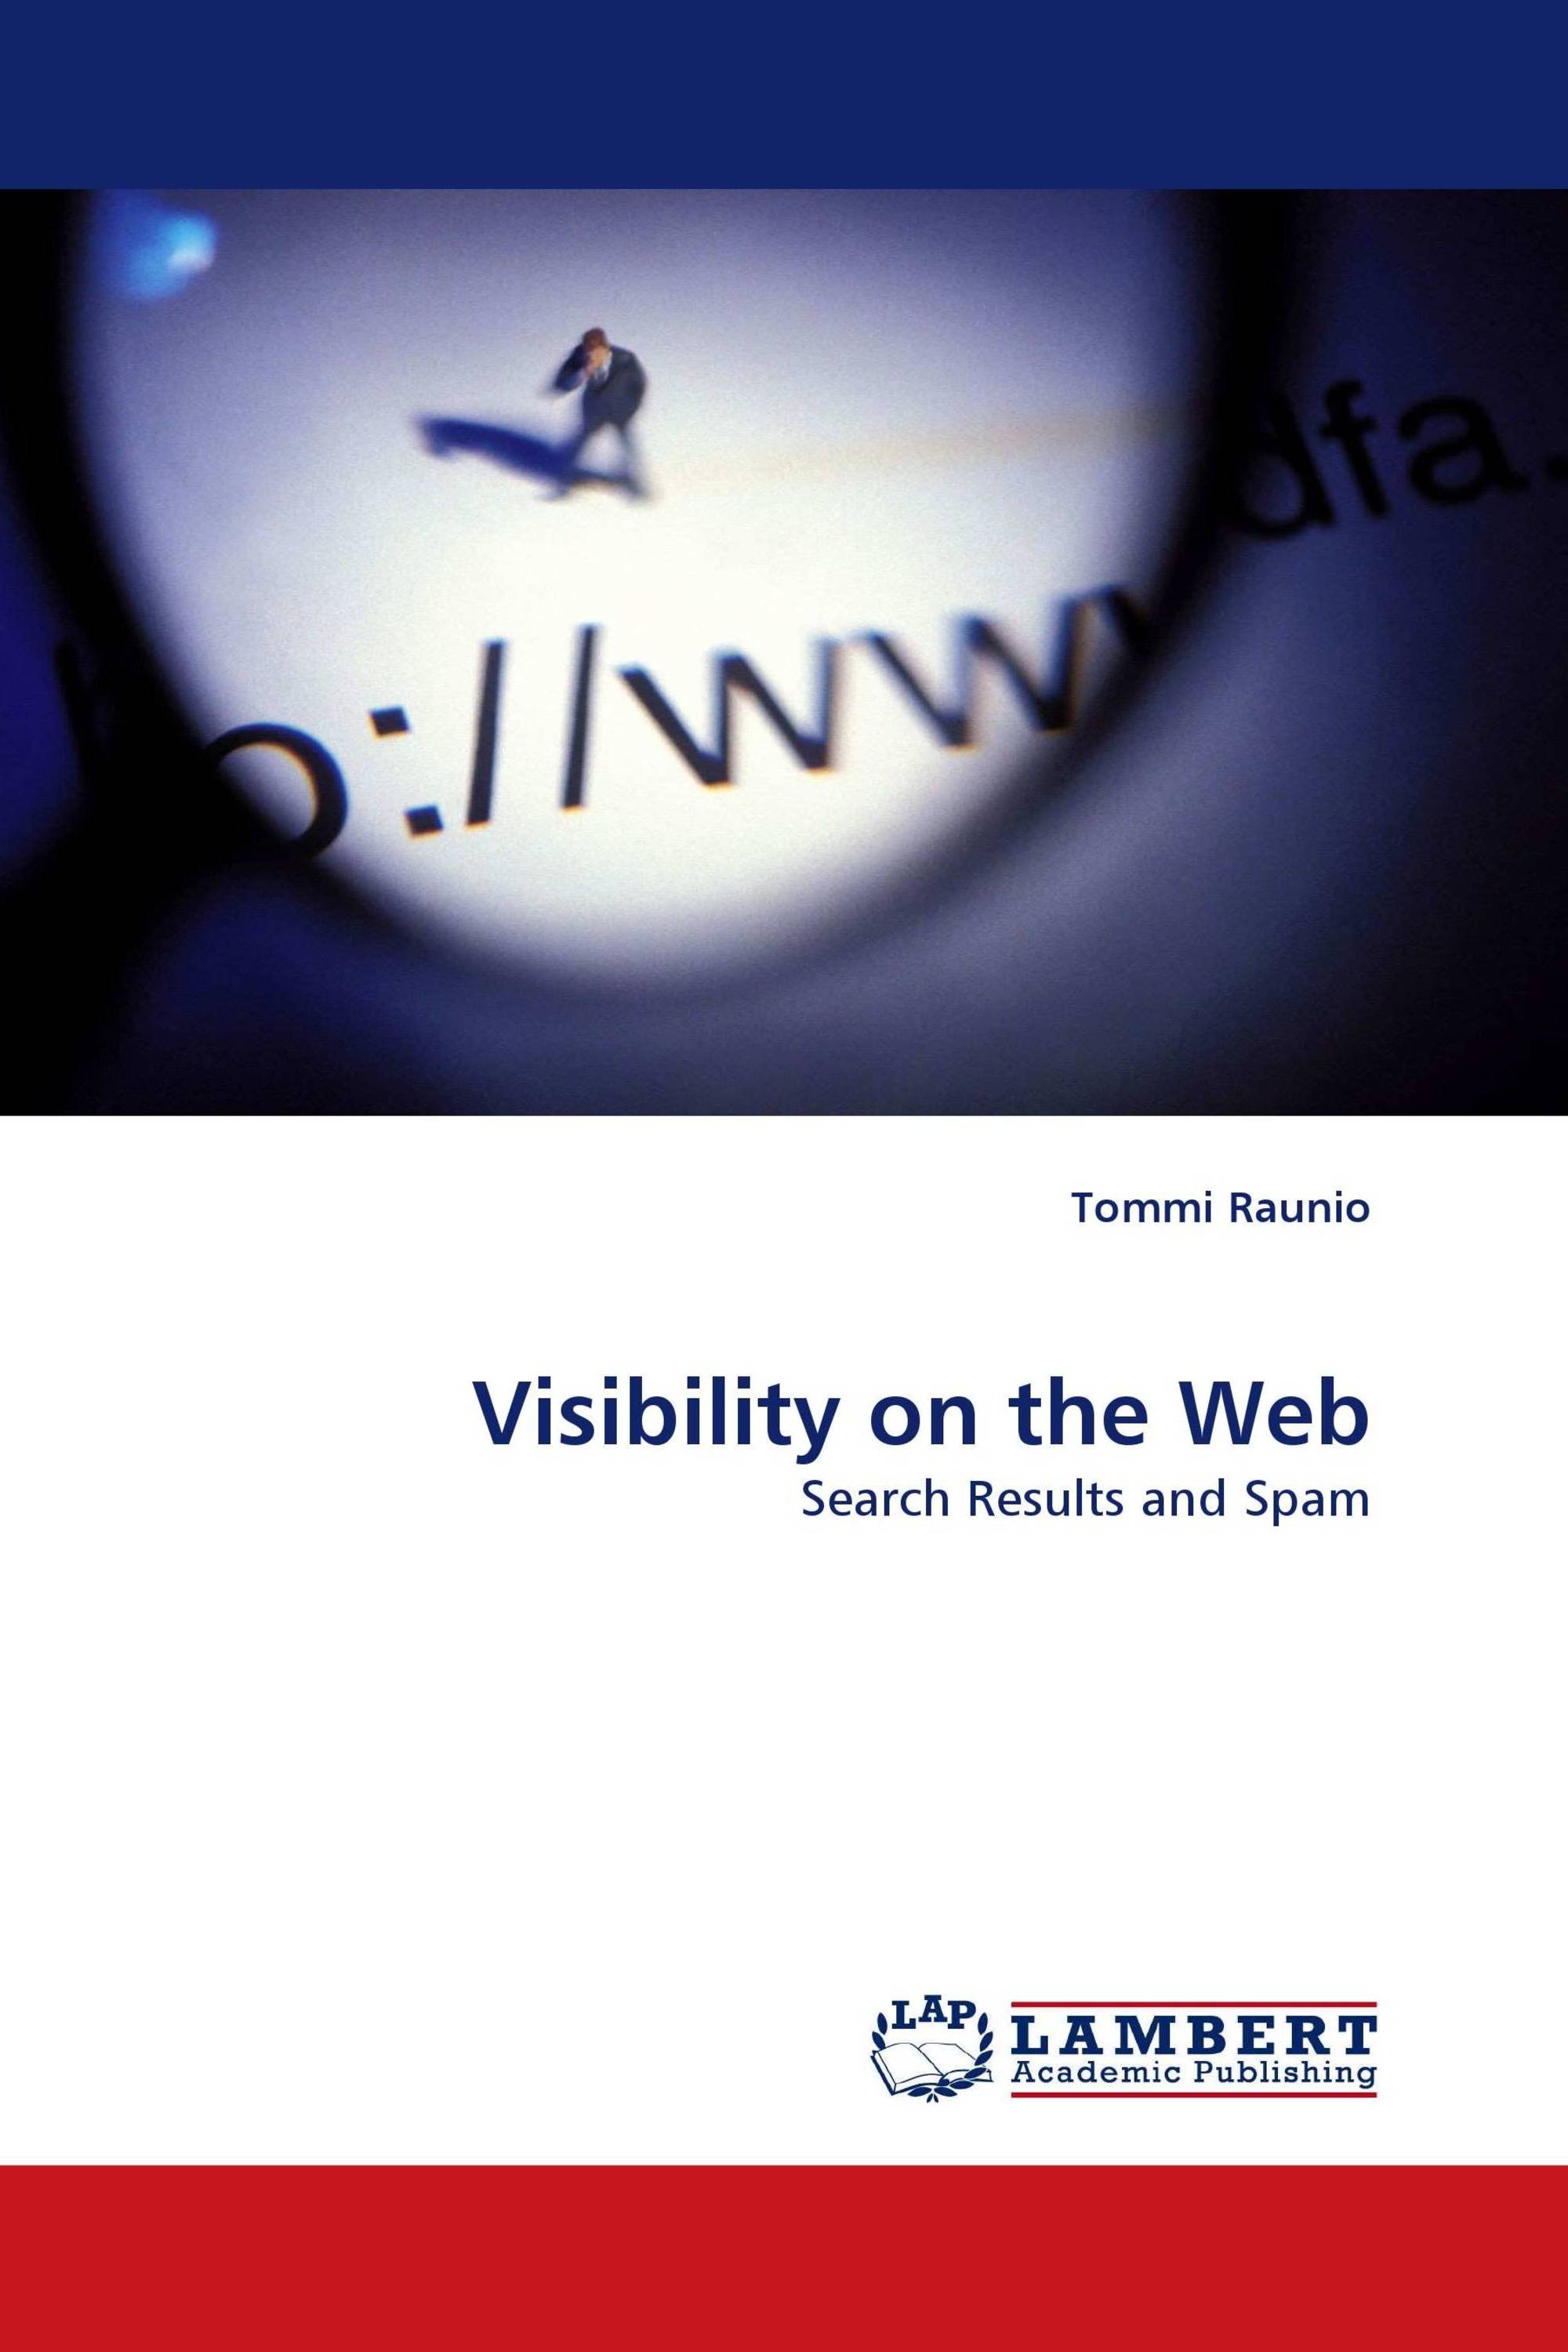 Visibility on the Web